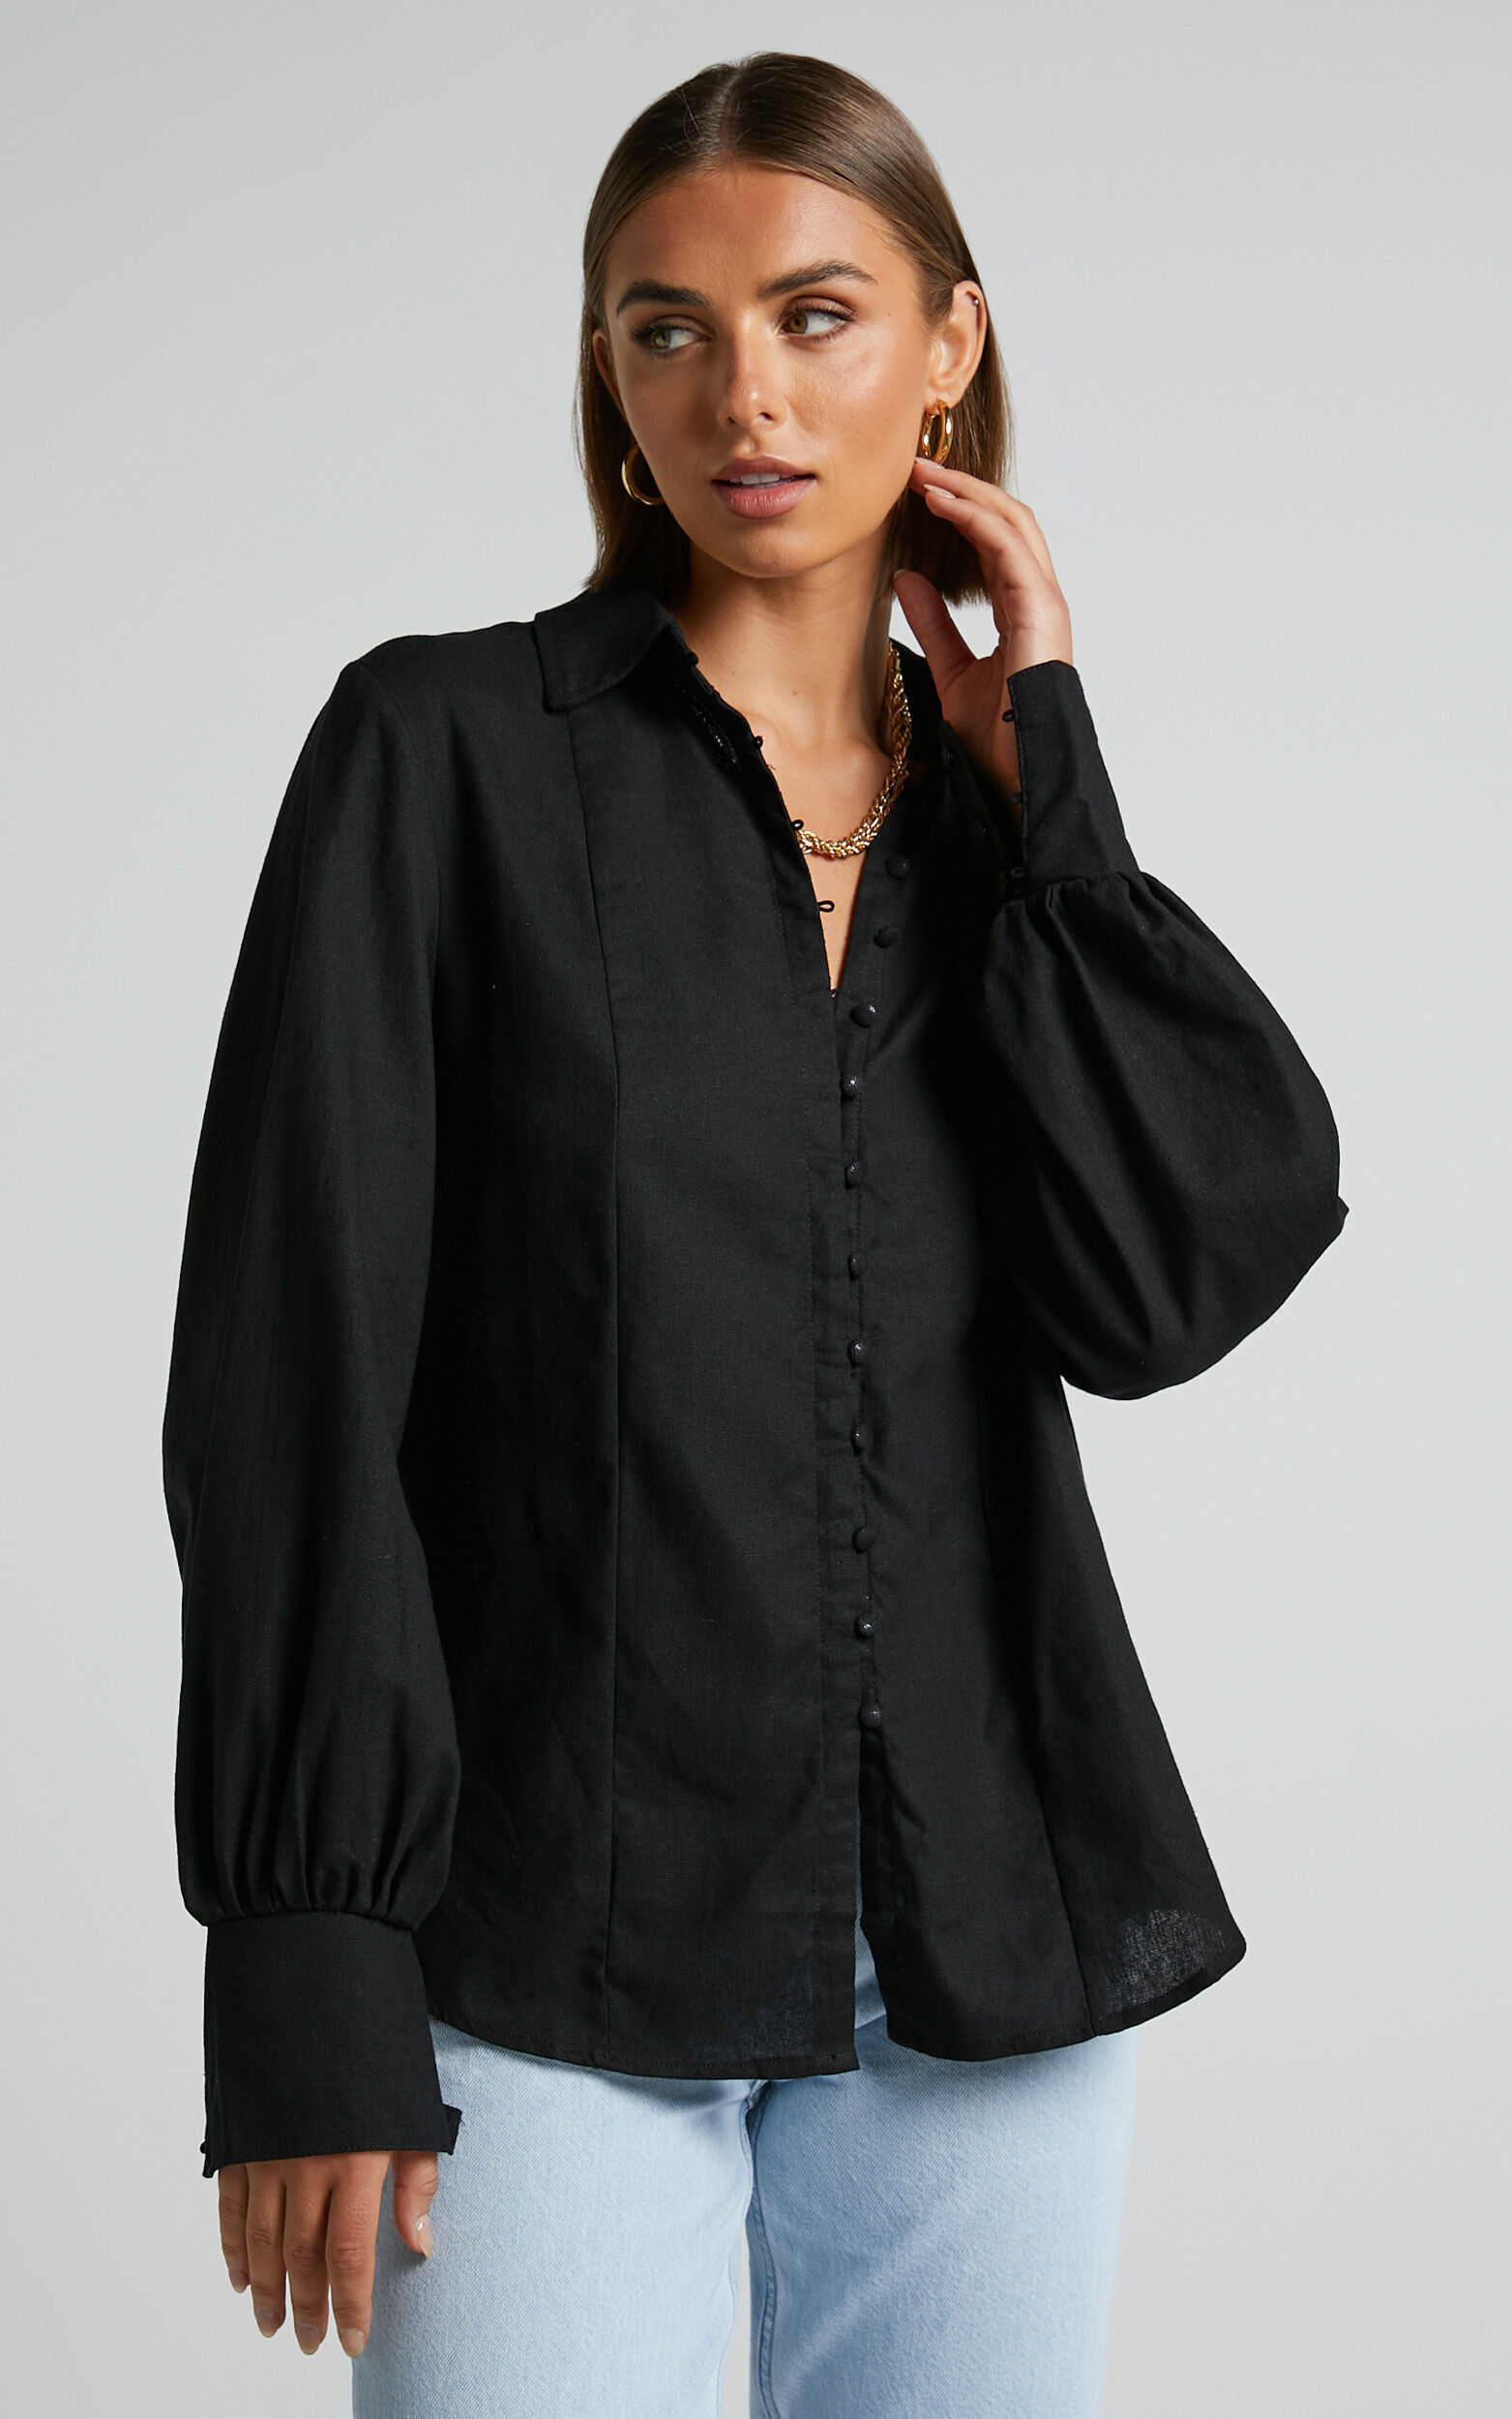 Kiva Blouse - Long Sleeve Button Up Blouse in Black - 06, BLK1